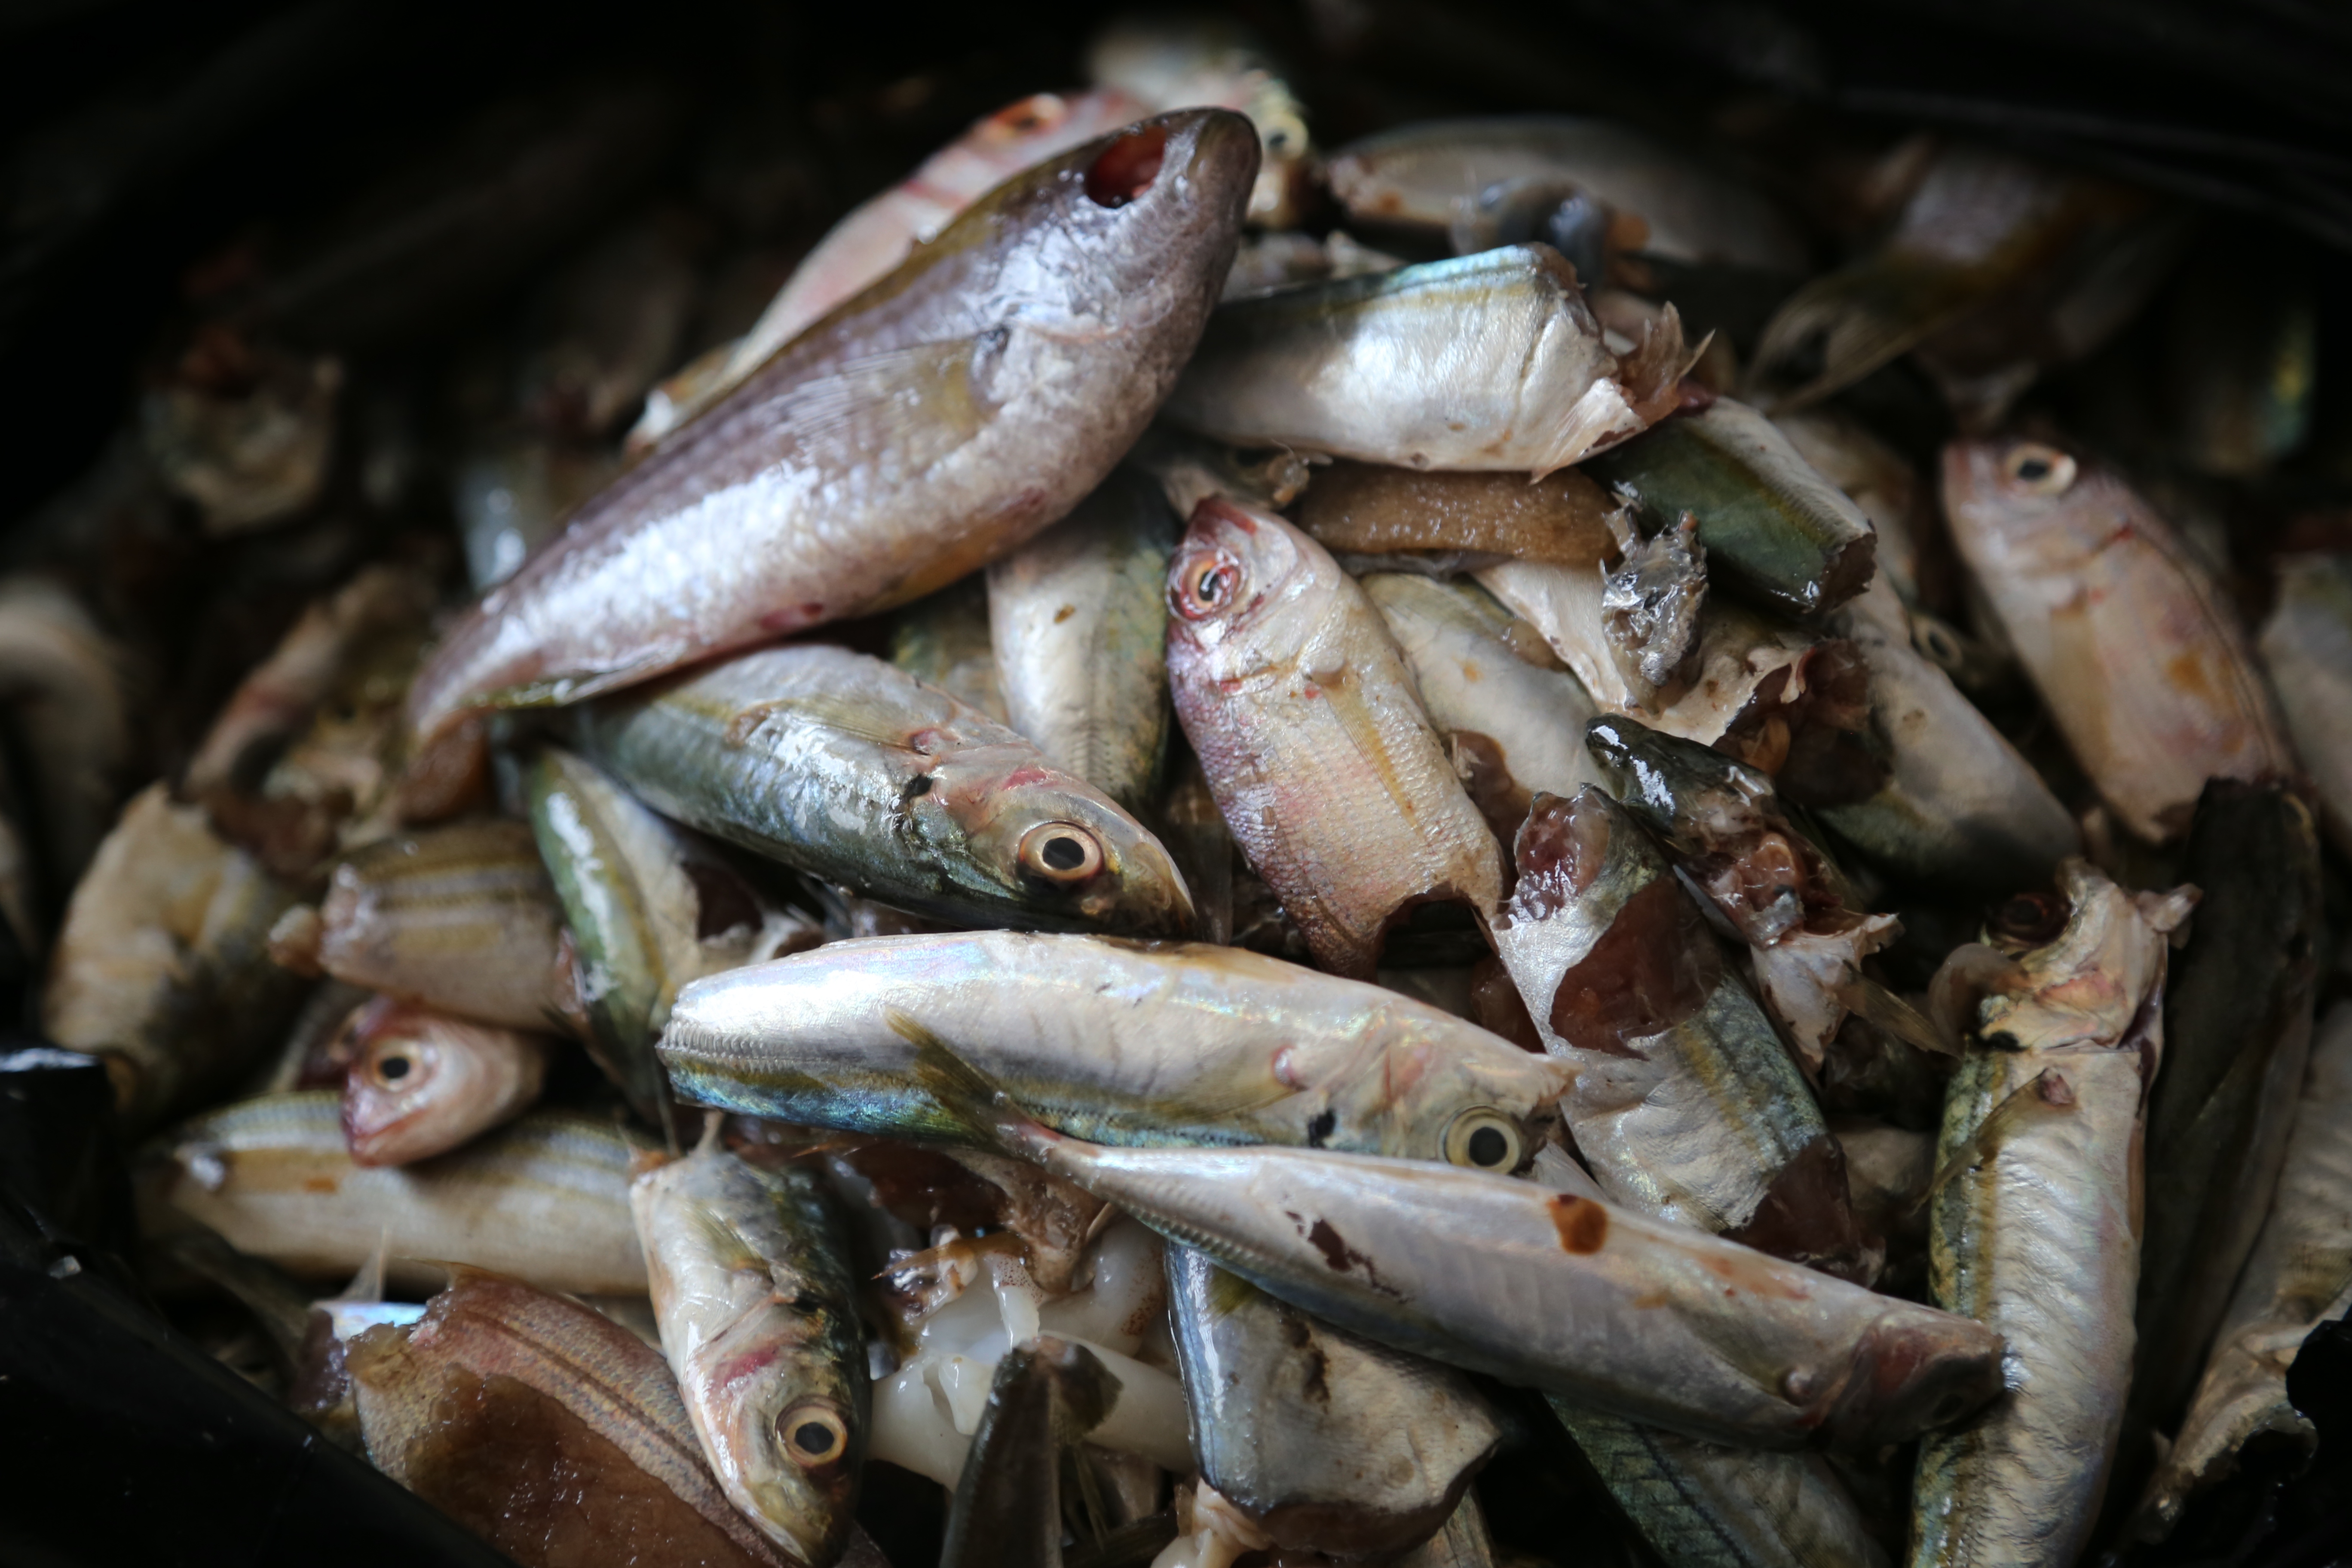 EJF Welcomes the EU's Warning to Cameroon: Crack Down on Illegal Fishing